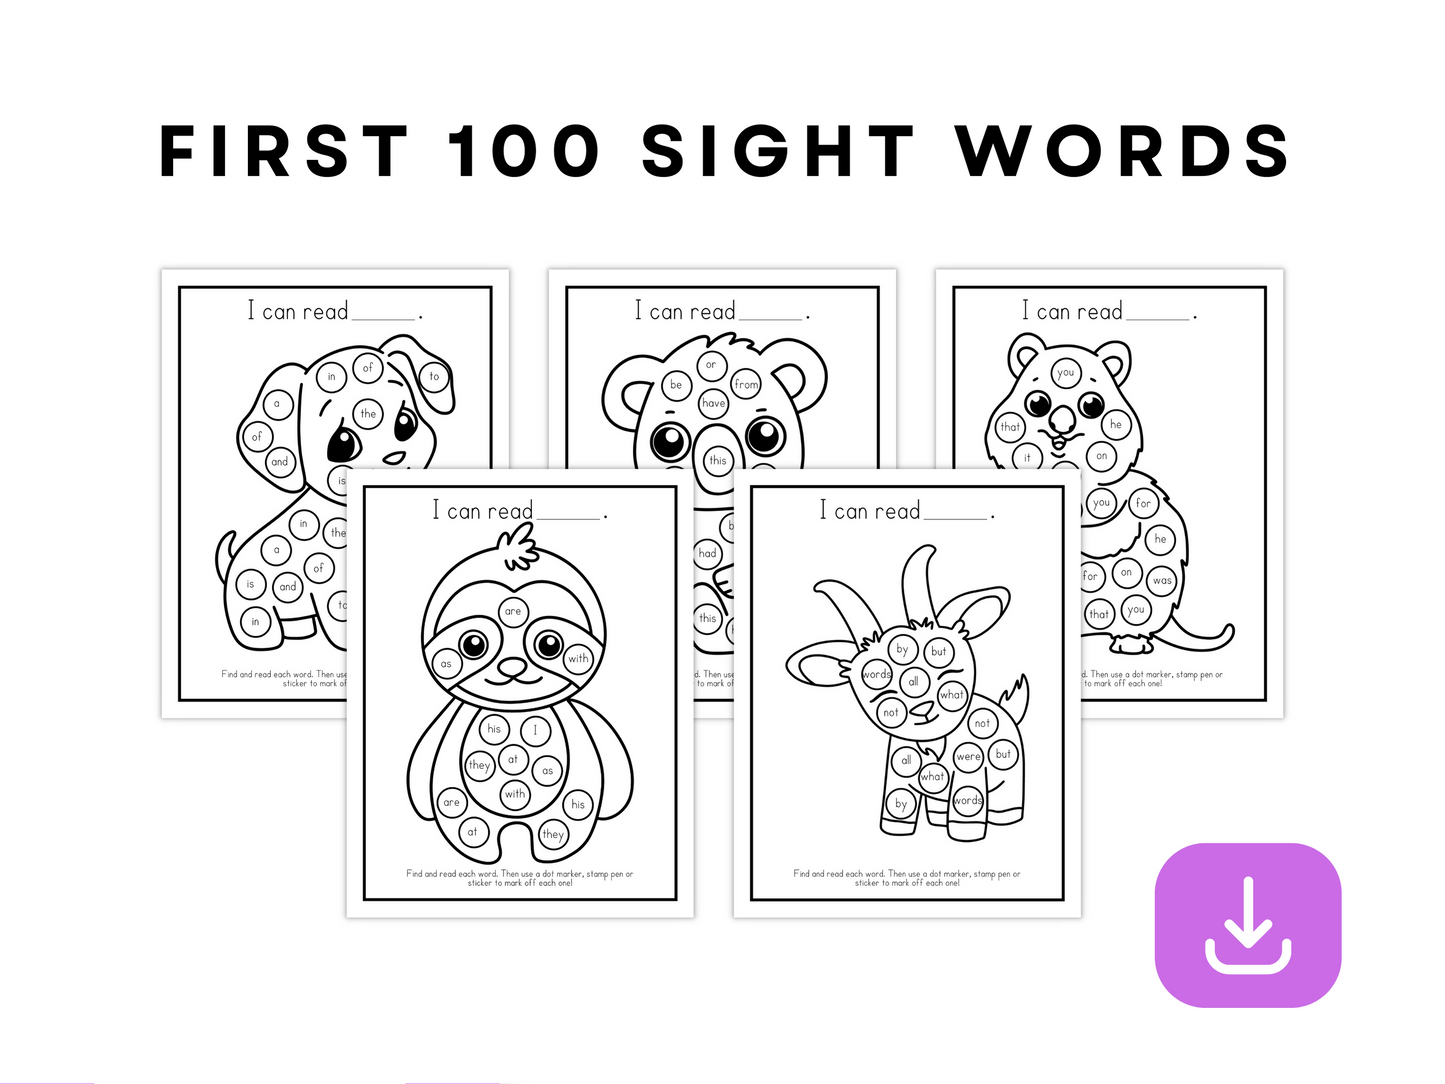 Dot Marker Reading Practice Coloring Pages | First 100 Sight Words